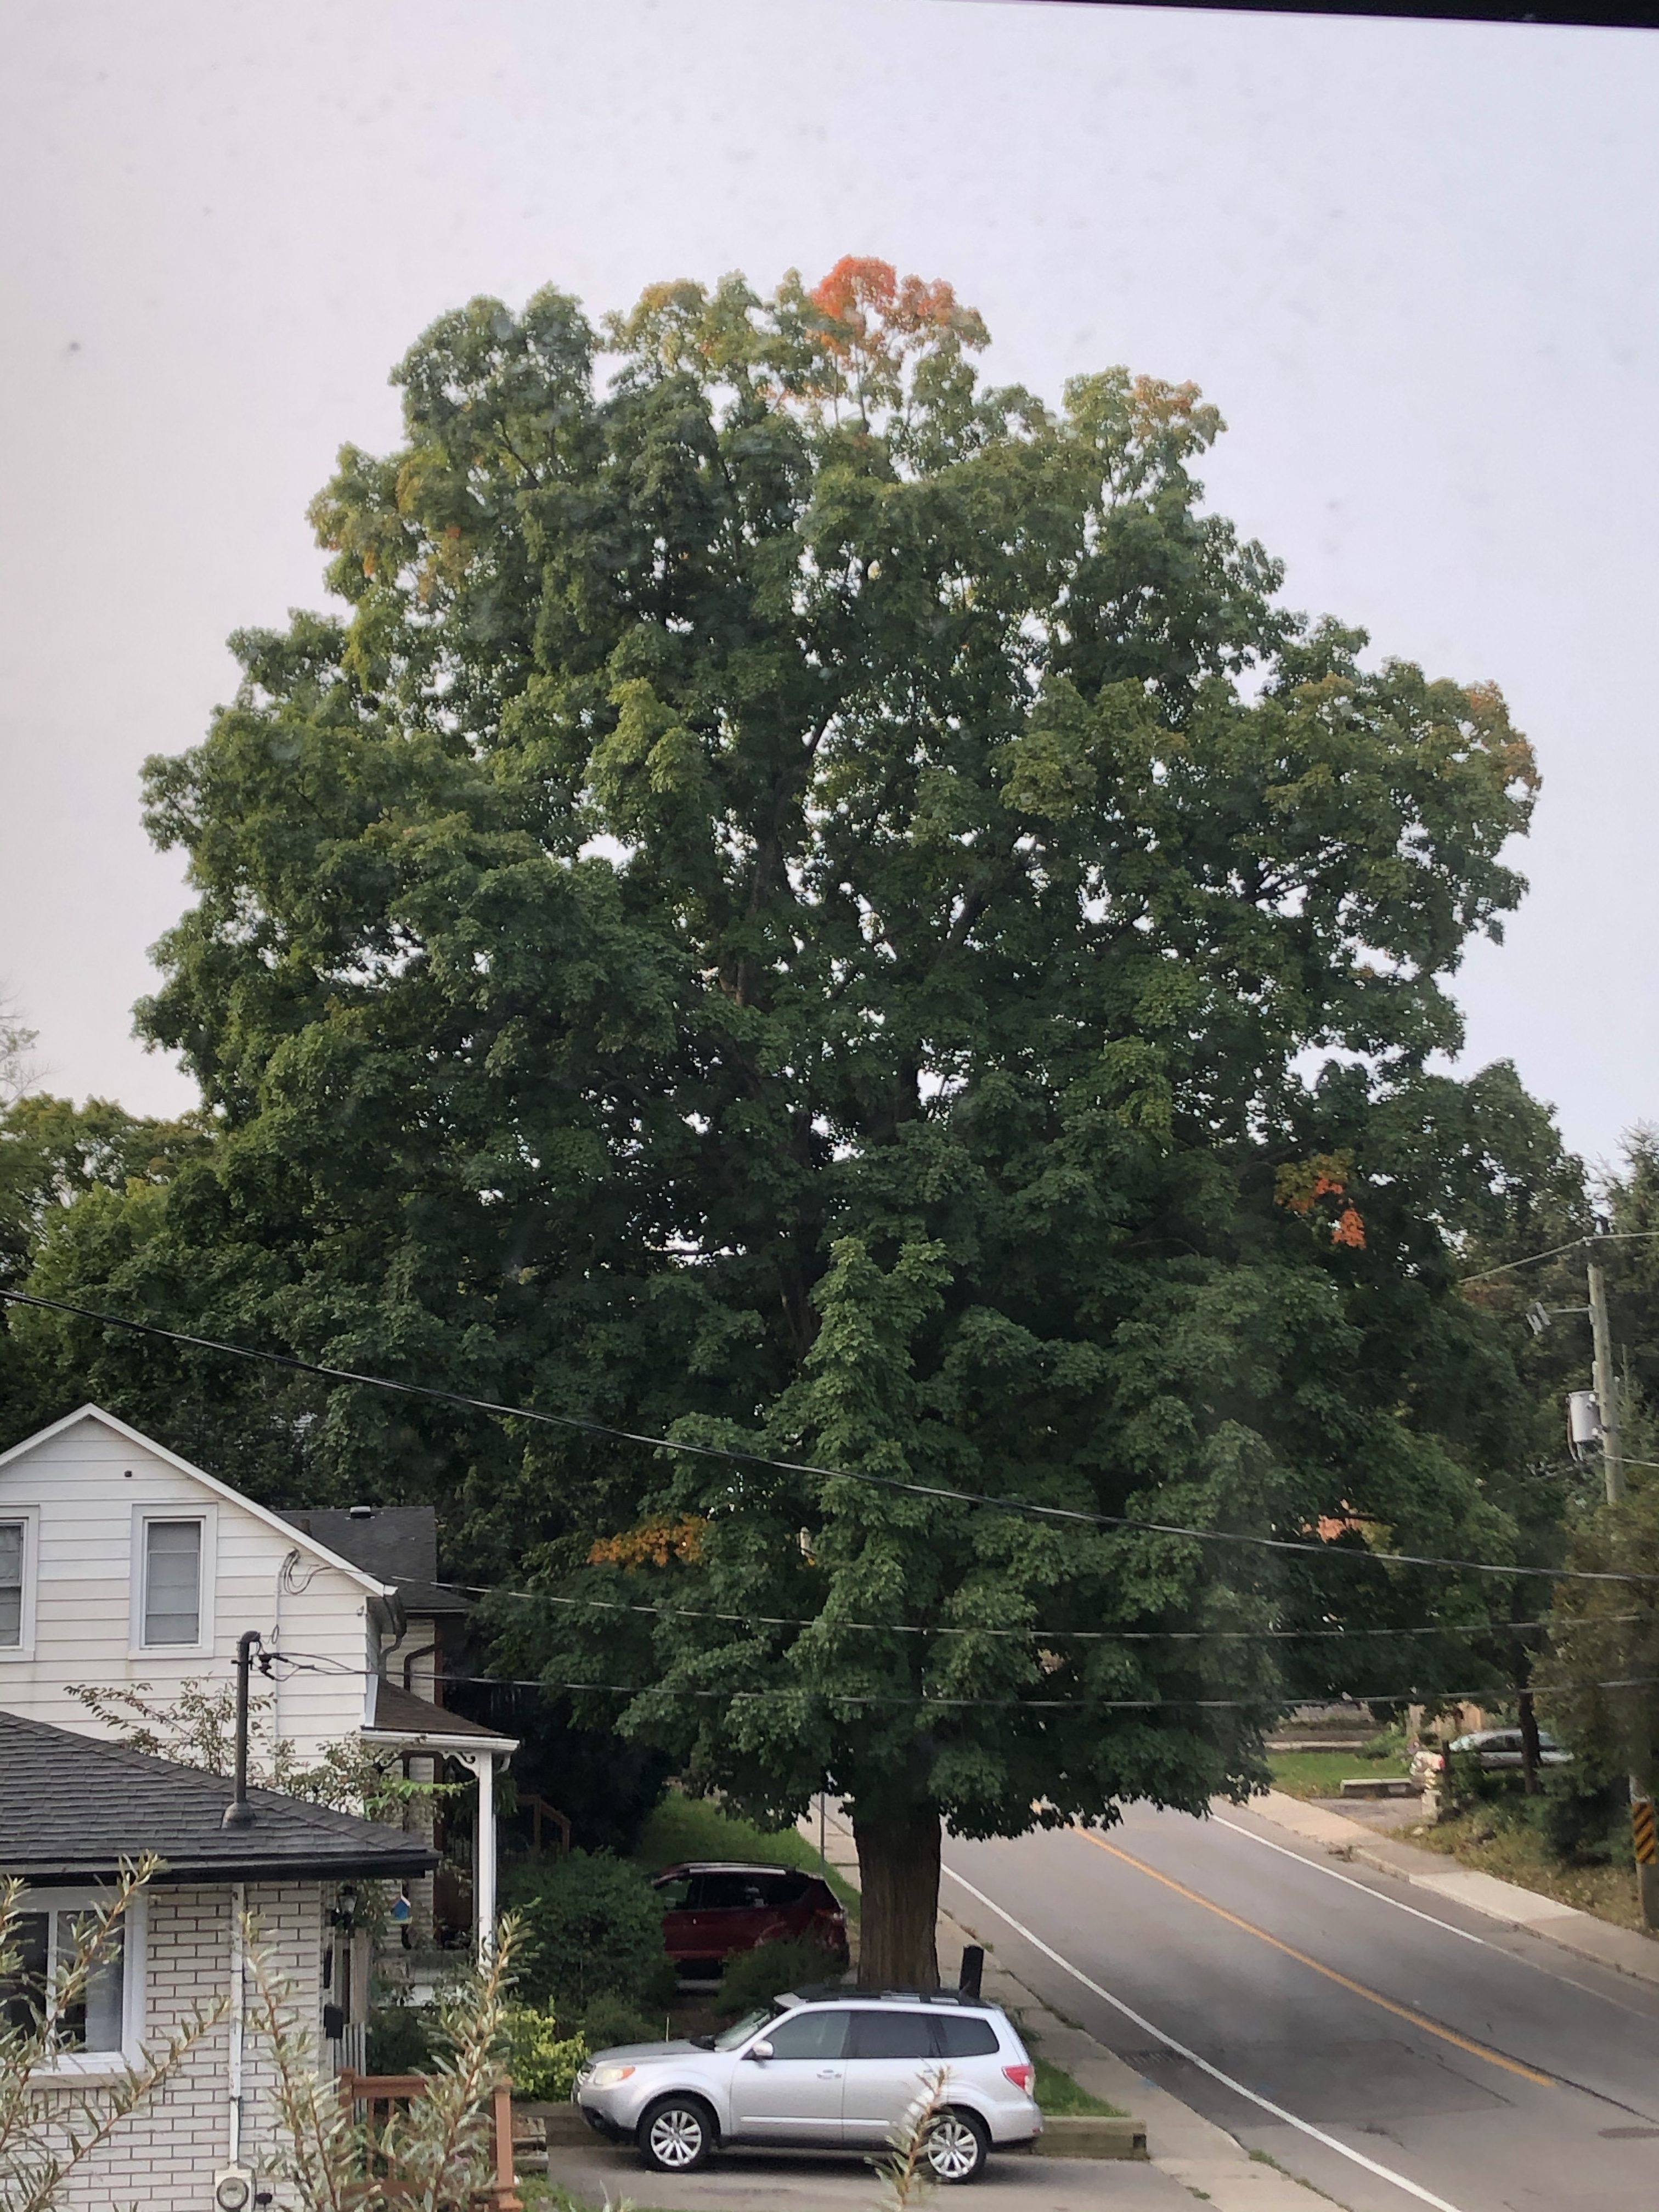 The tree on 14 September 2020. A few hints of autumnal orange.